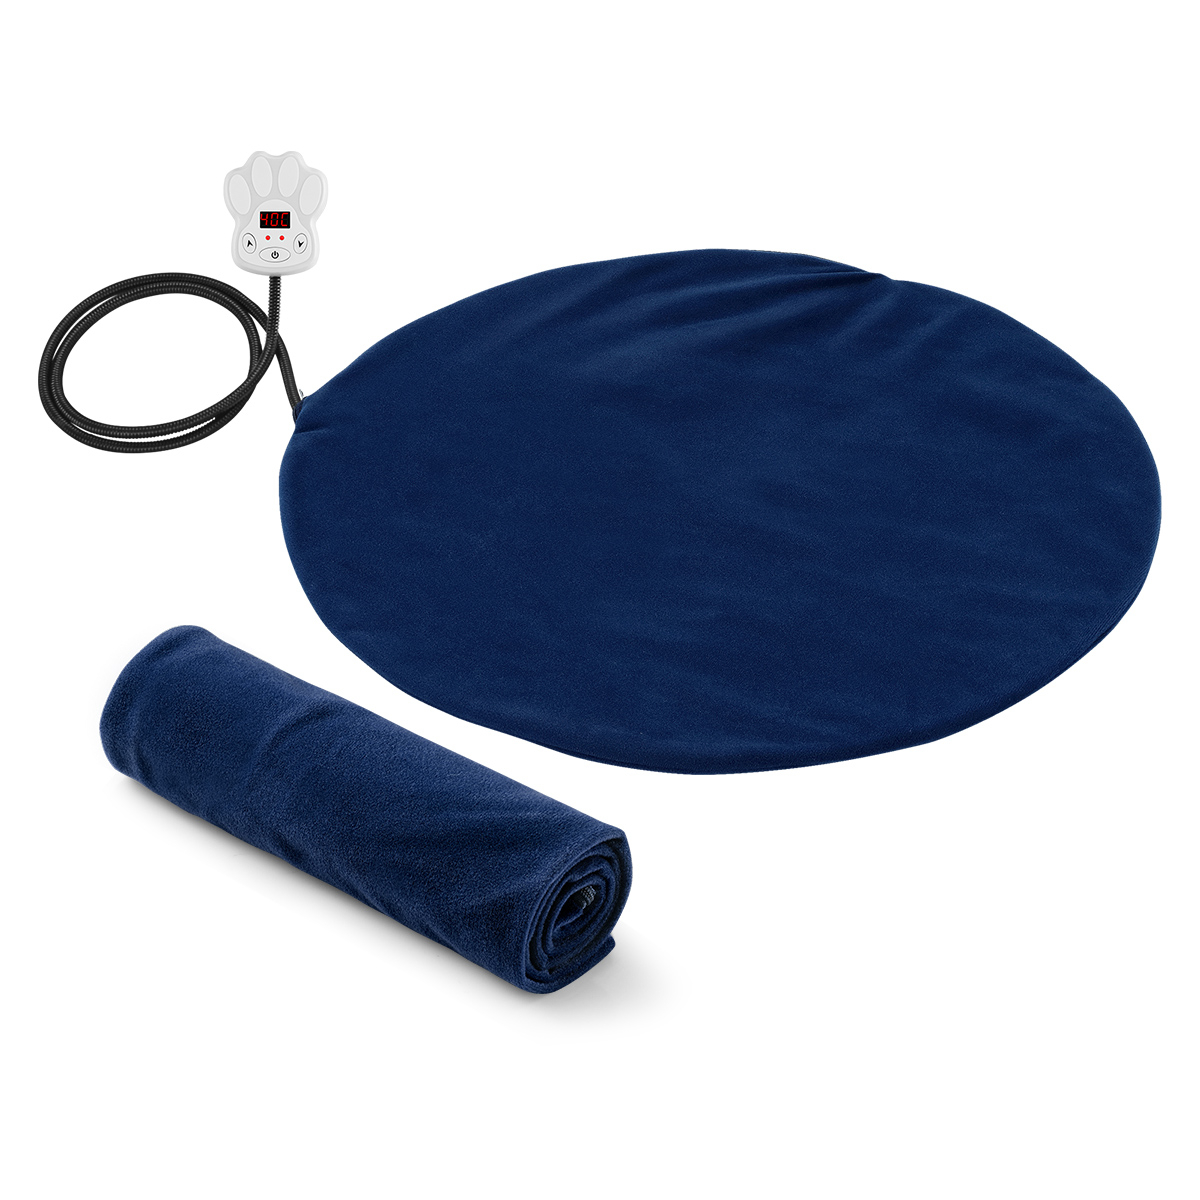 Electrical Heating Pad including Two Fleece Covers